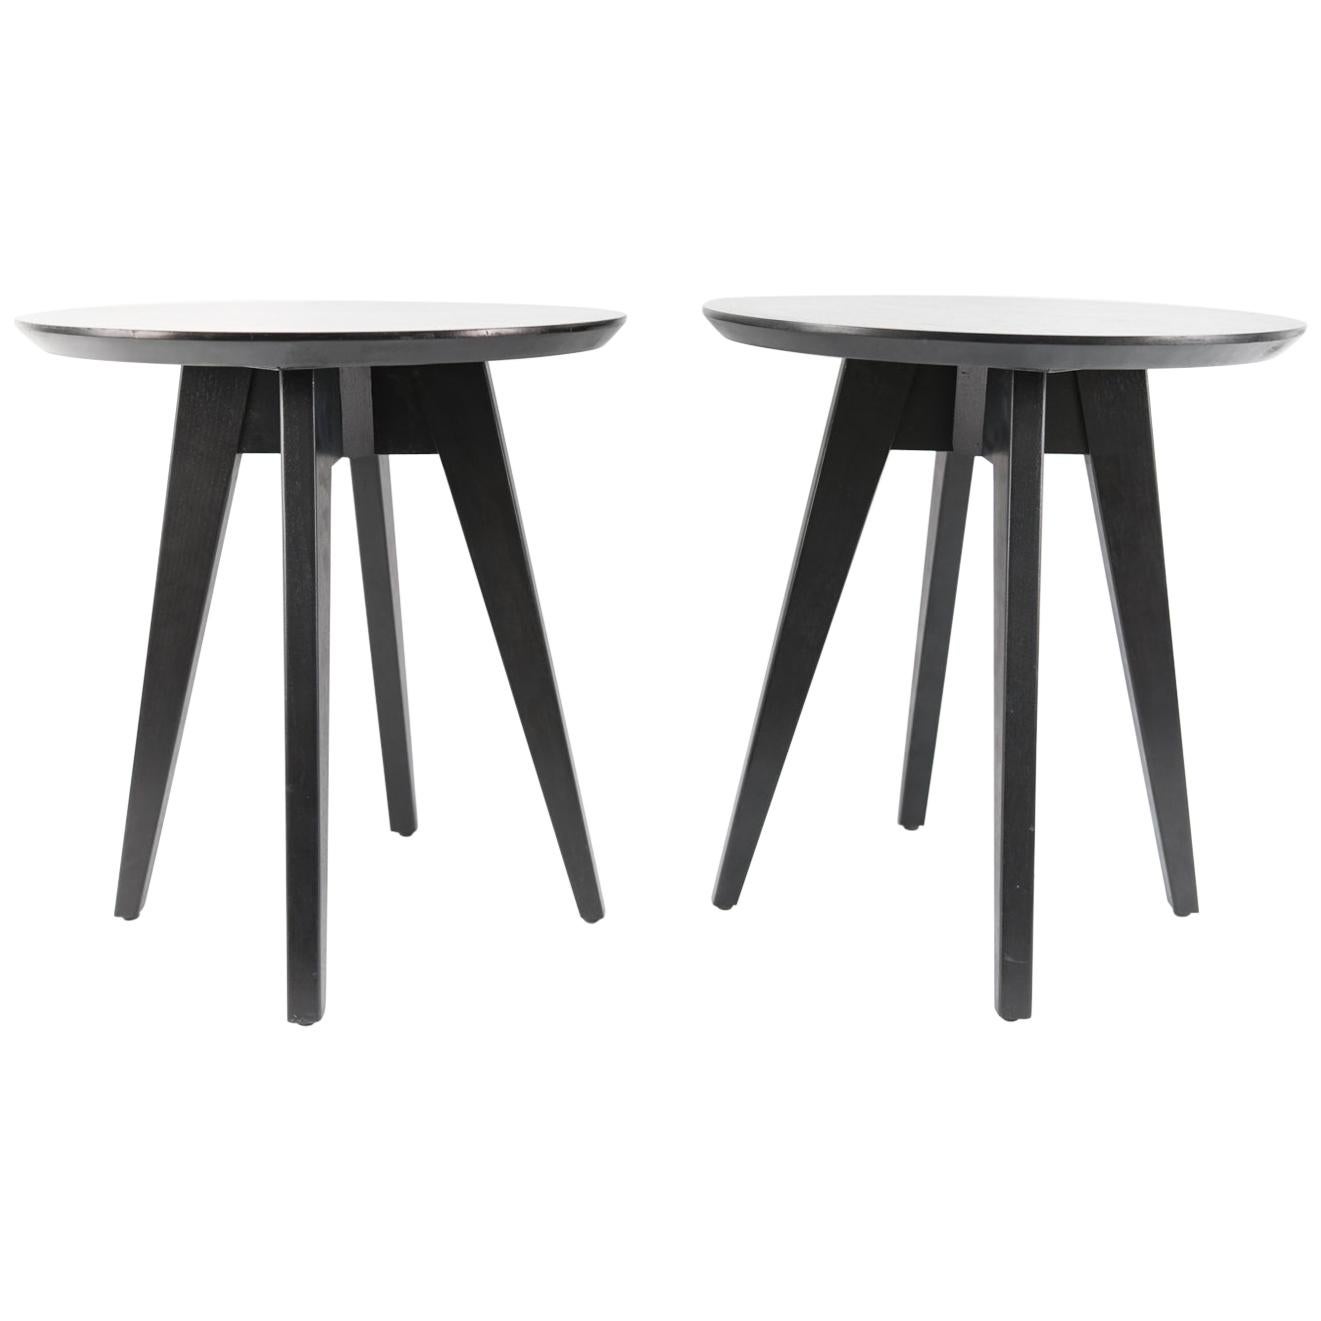 Pair of Jens Risom for Knoll Round Side Tables